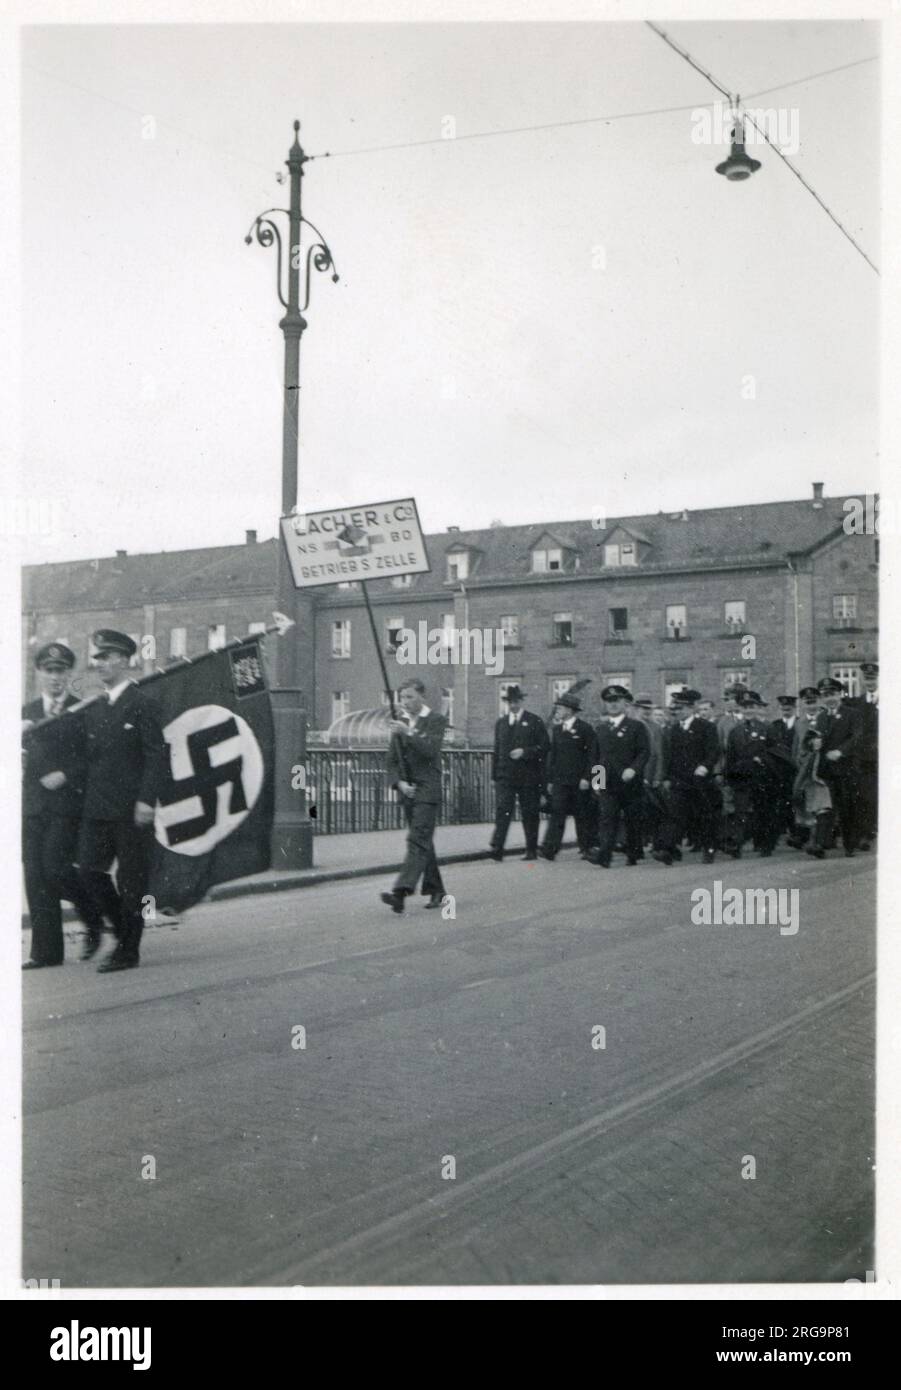 Rally - Parade - Pforzheim, southwestern Germany on 1st May 1935.  Following the Nazi flag are workers from LACO (Lacher & Co), who manufactured watches issued to German Airforce pilots and bomber aircraft observers during WW2. Stock Photo